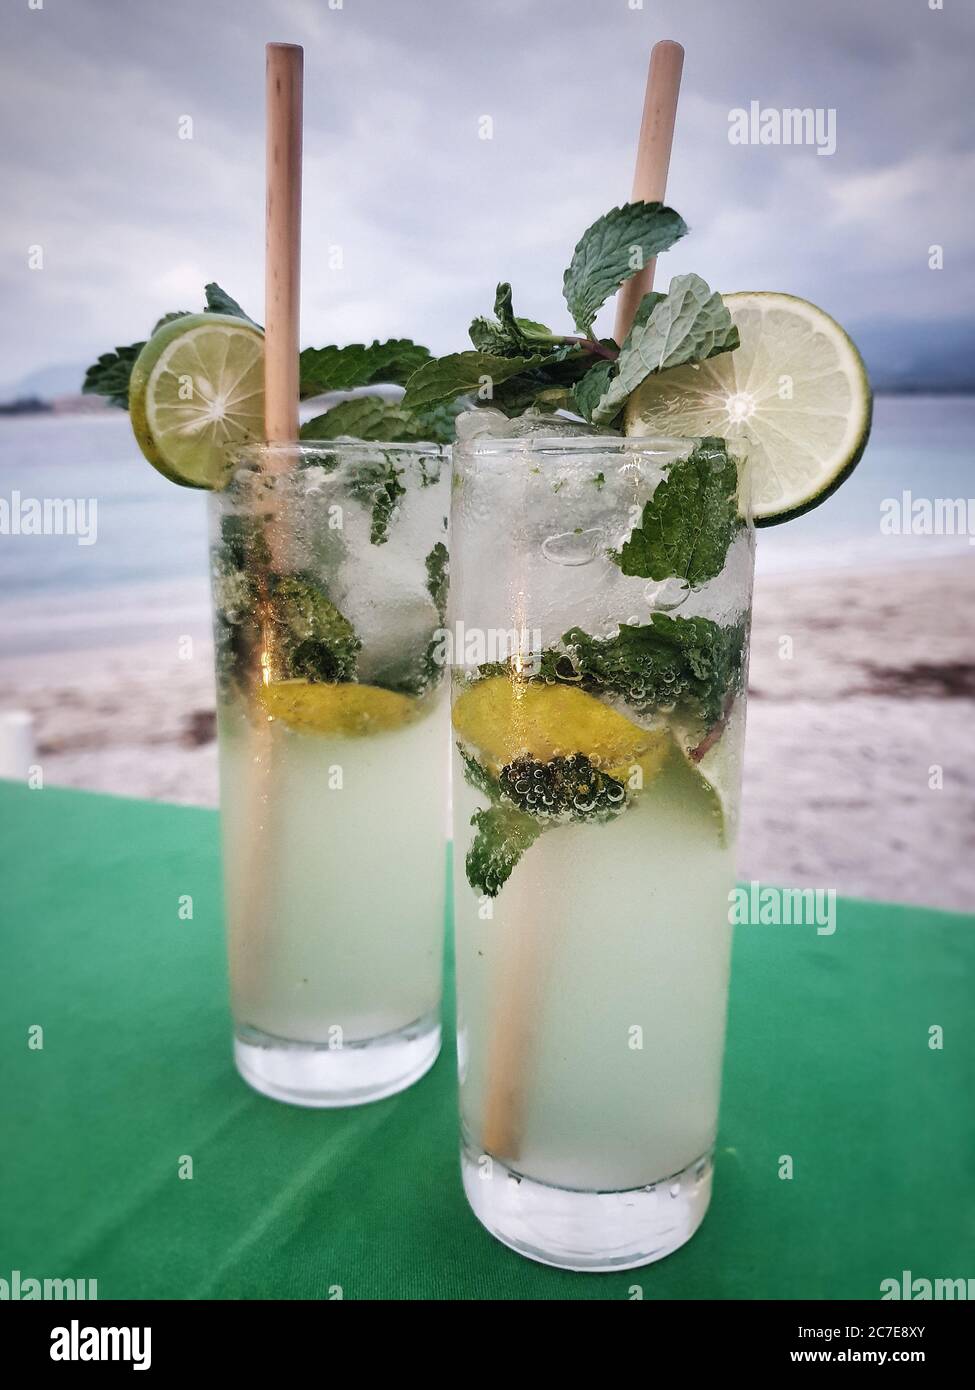 Close up of two mojitos in tall glasses with wooden straws on a green table on a beach in Indonesia Stock Photo